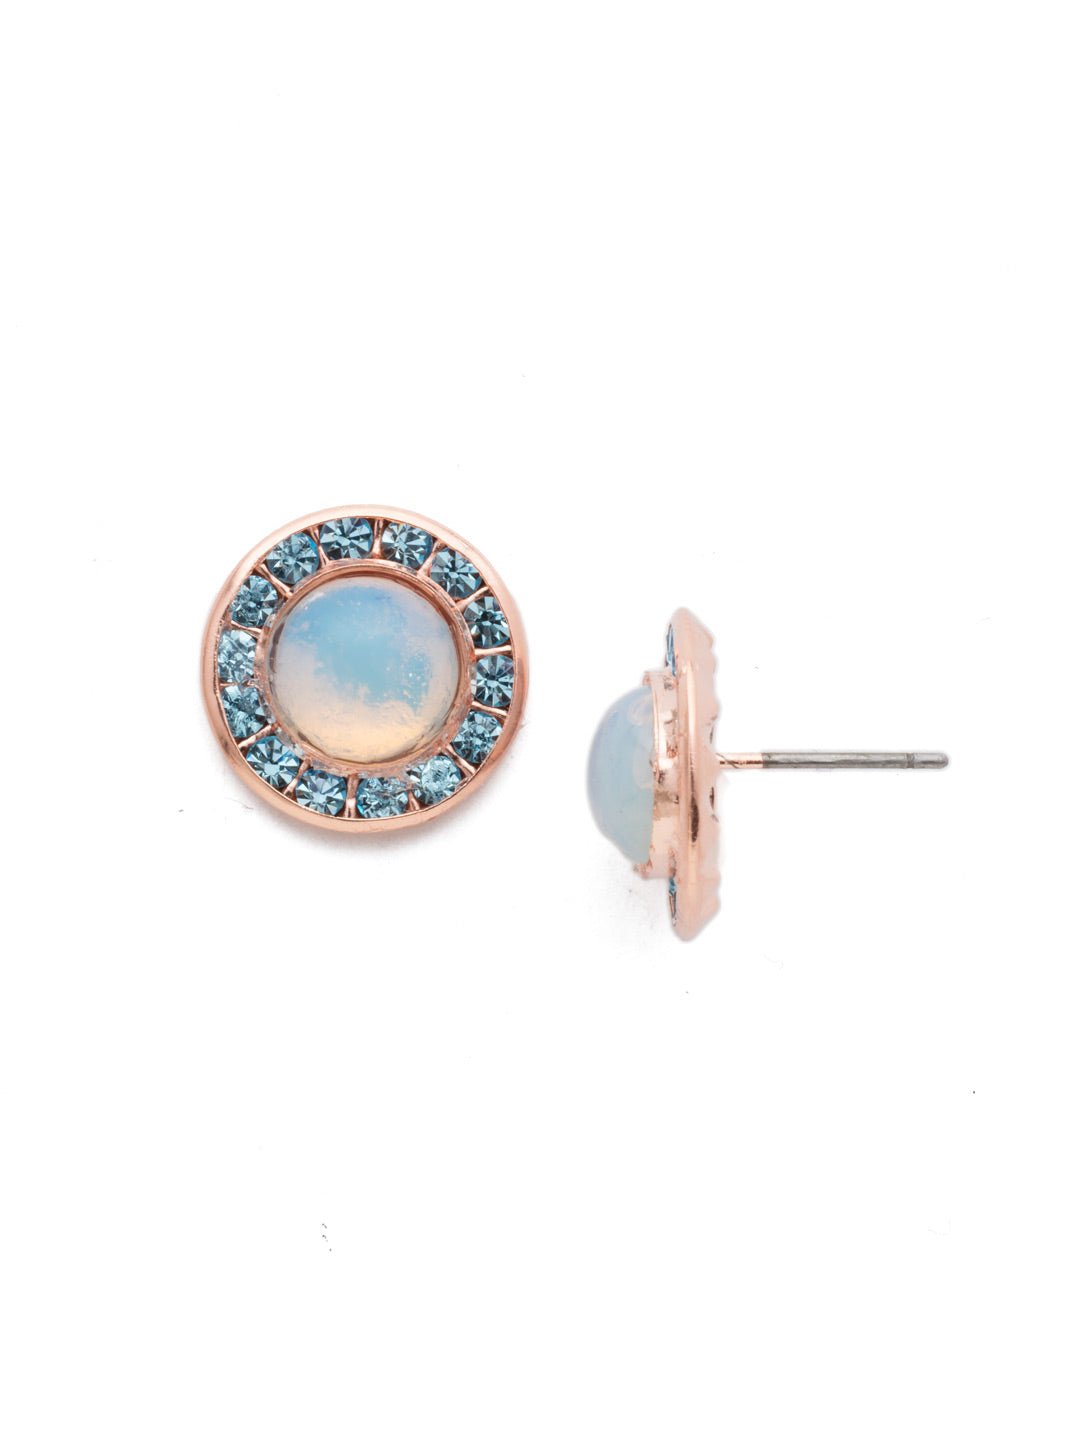 Kaia Stud Earrings - EET10RGCAZ - They may be small, simple posts, but our Kaia Stud Earrings offer something special with their irridescent center stone rimmed in extra crystal sparkle. From Sorrelli's Crystal Azure collection in our Rose Gold-tone finish.